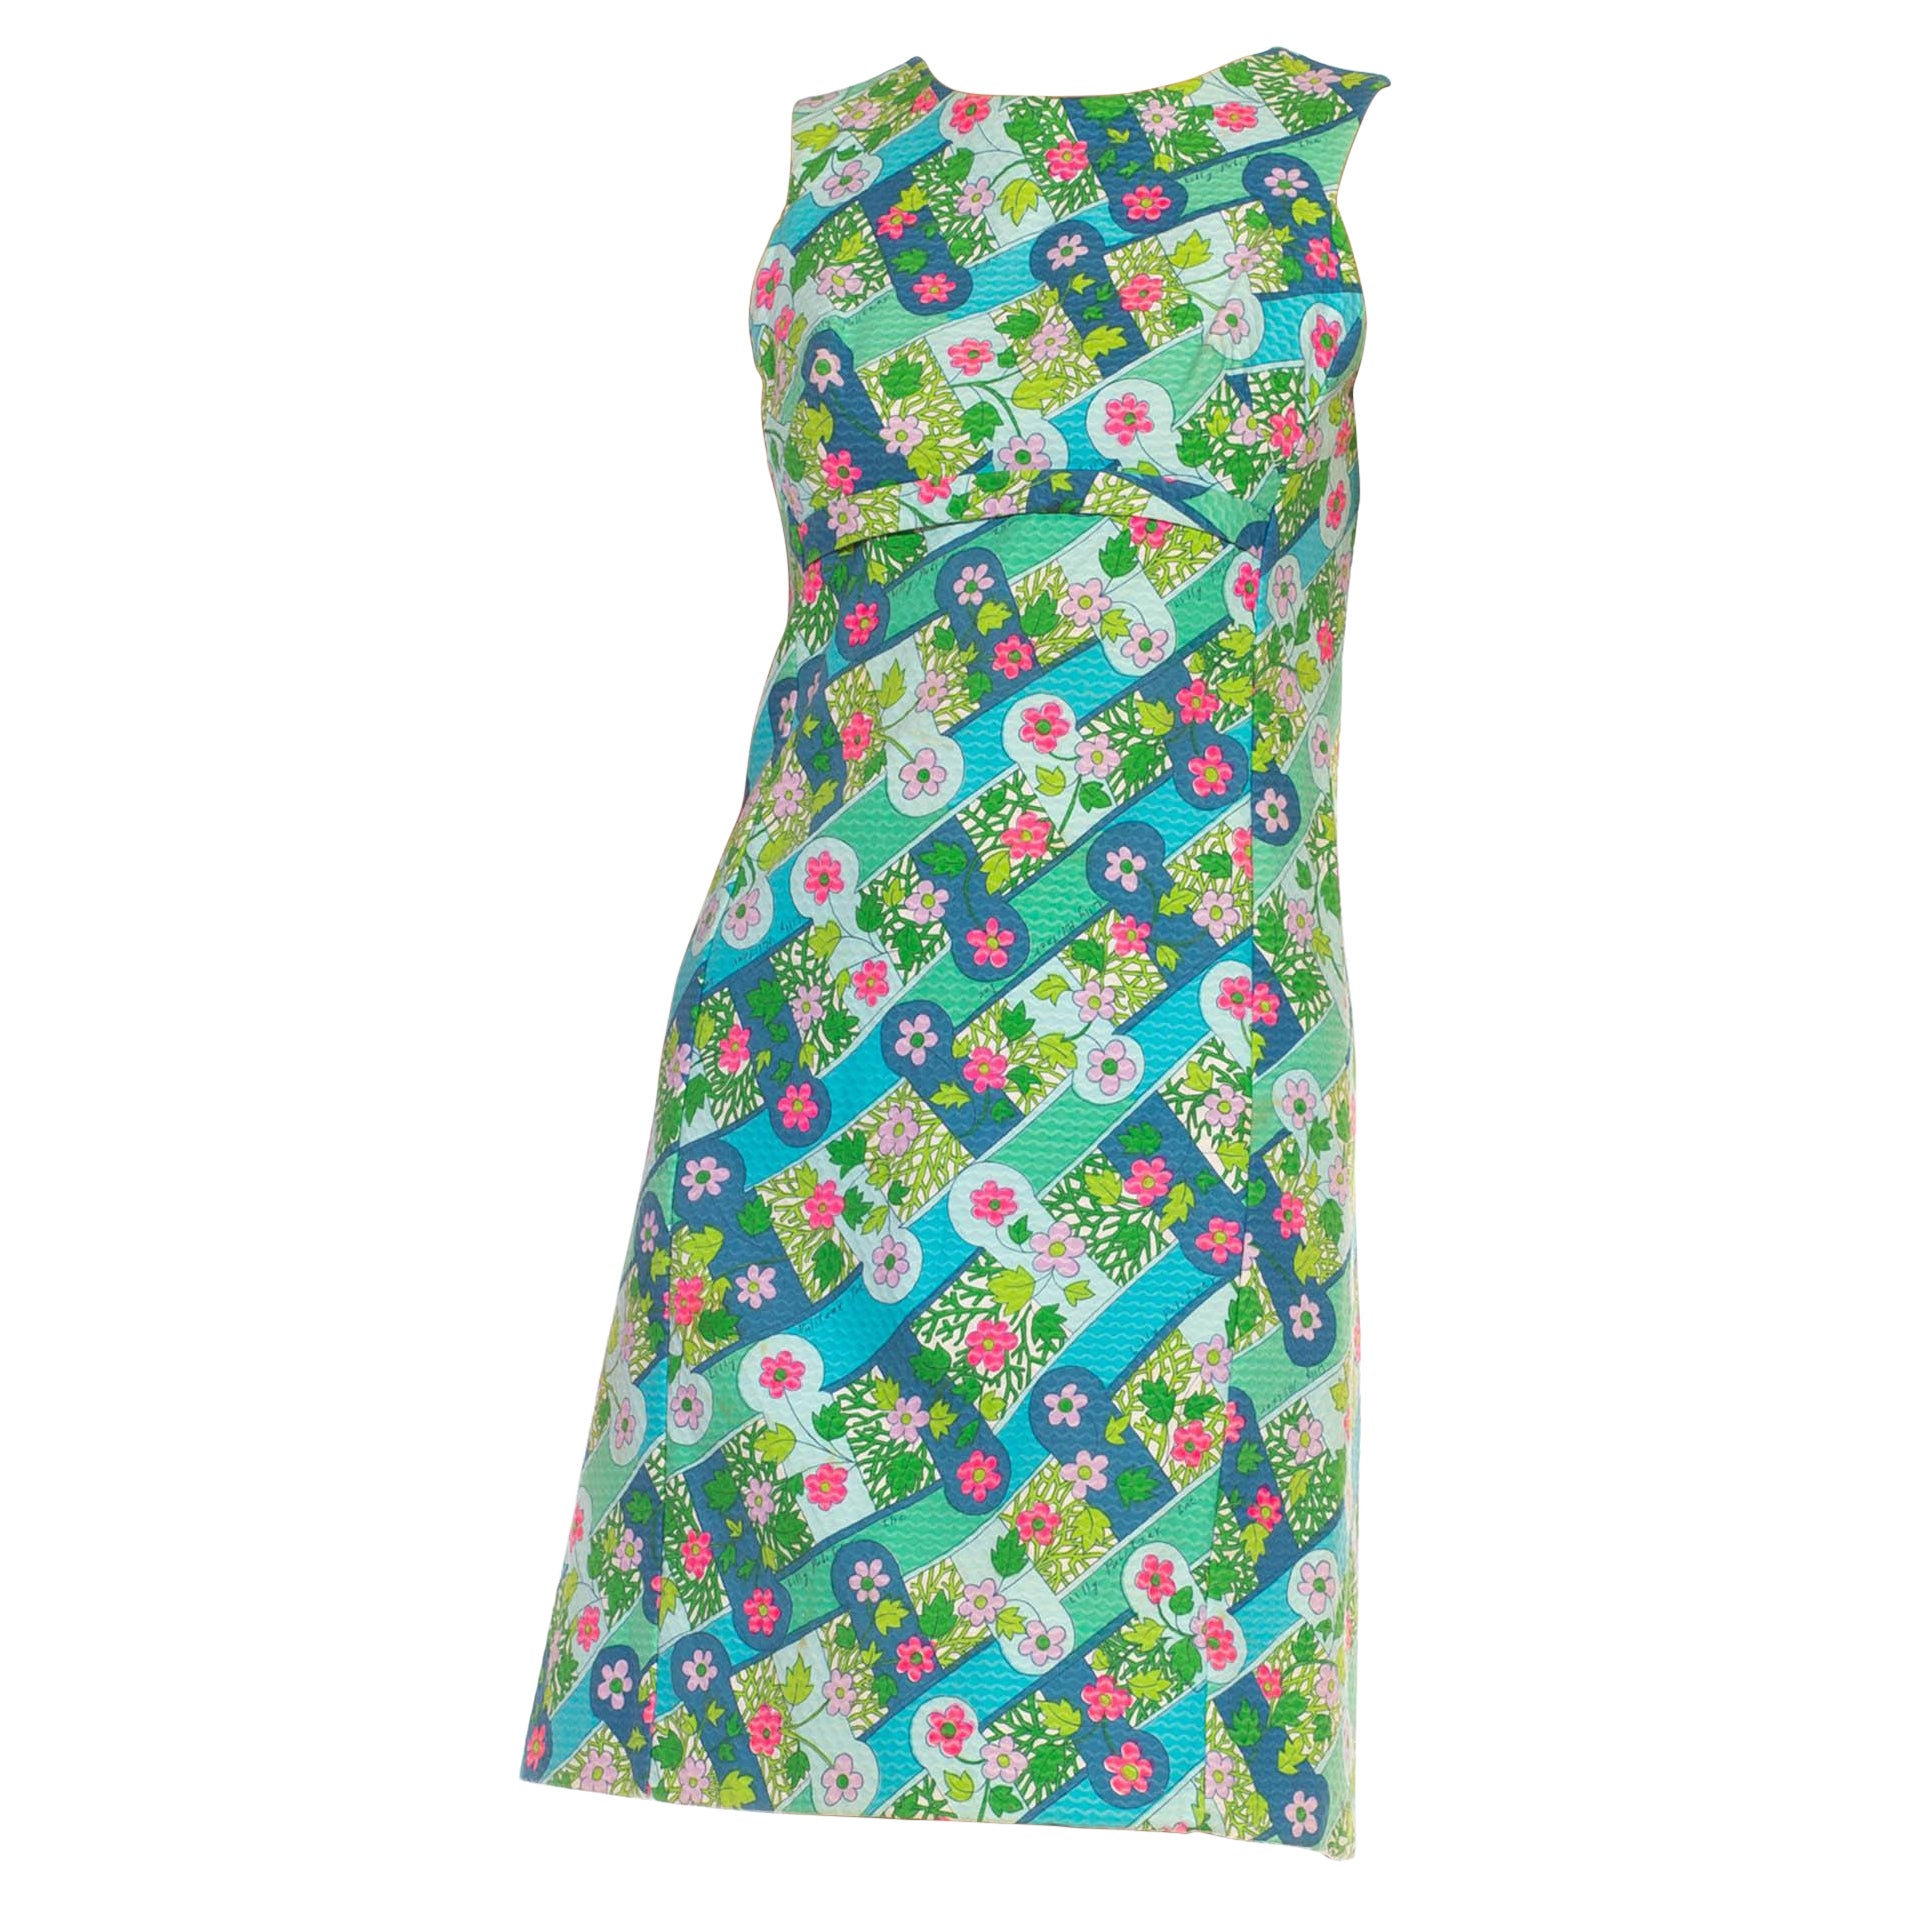 Lilly Pulitzer Psychedelic Geometric Floral Printed Dr, Baumwolle in Blau & Rosa, 1960er Jahre im Angebot